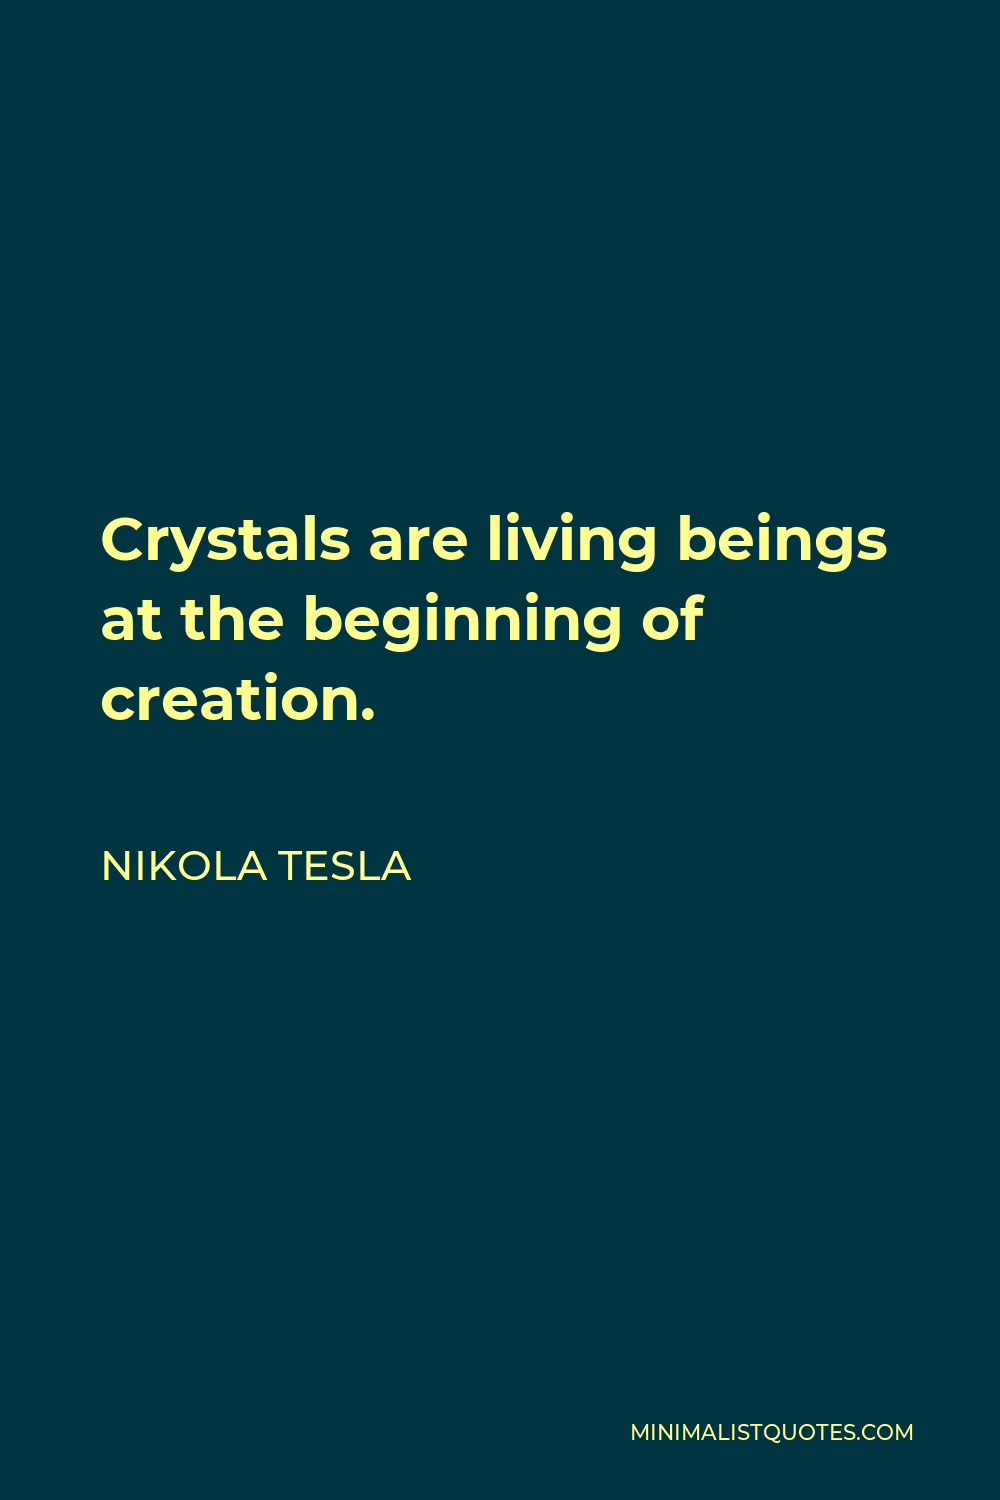 Nikola Tesla Quote - Crystals are living beings at the beginning of creation.